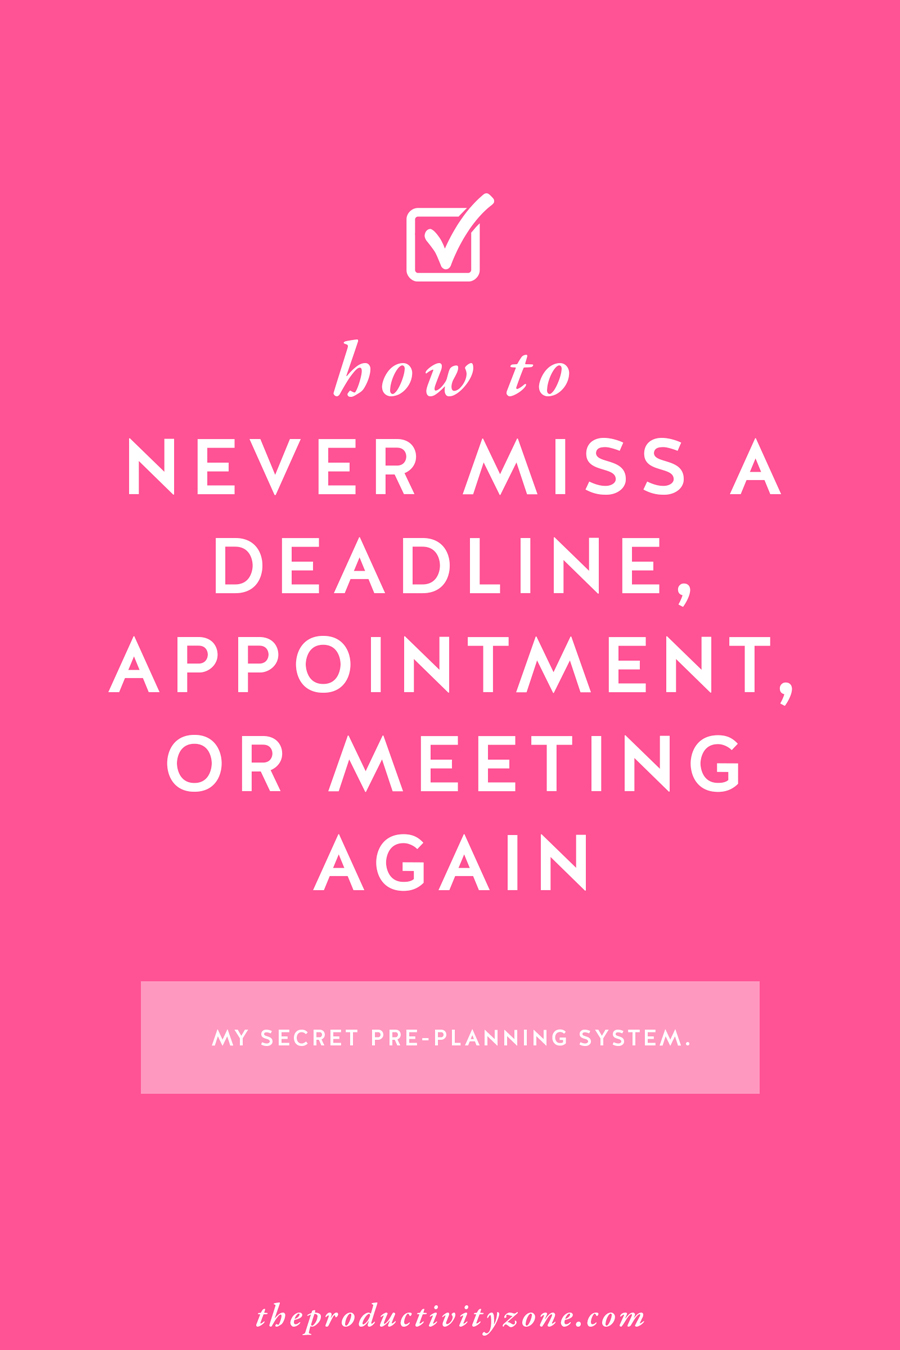 Learn the most important step people often skip and my secret pre-planning system so you never miss a deadline, appointment, or meeting again on The Productivity Zone!!